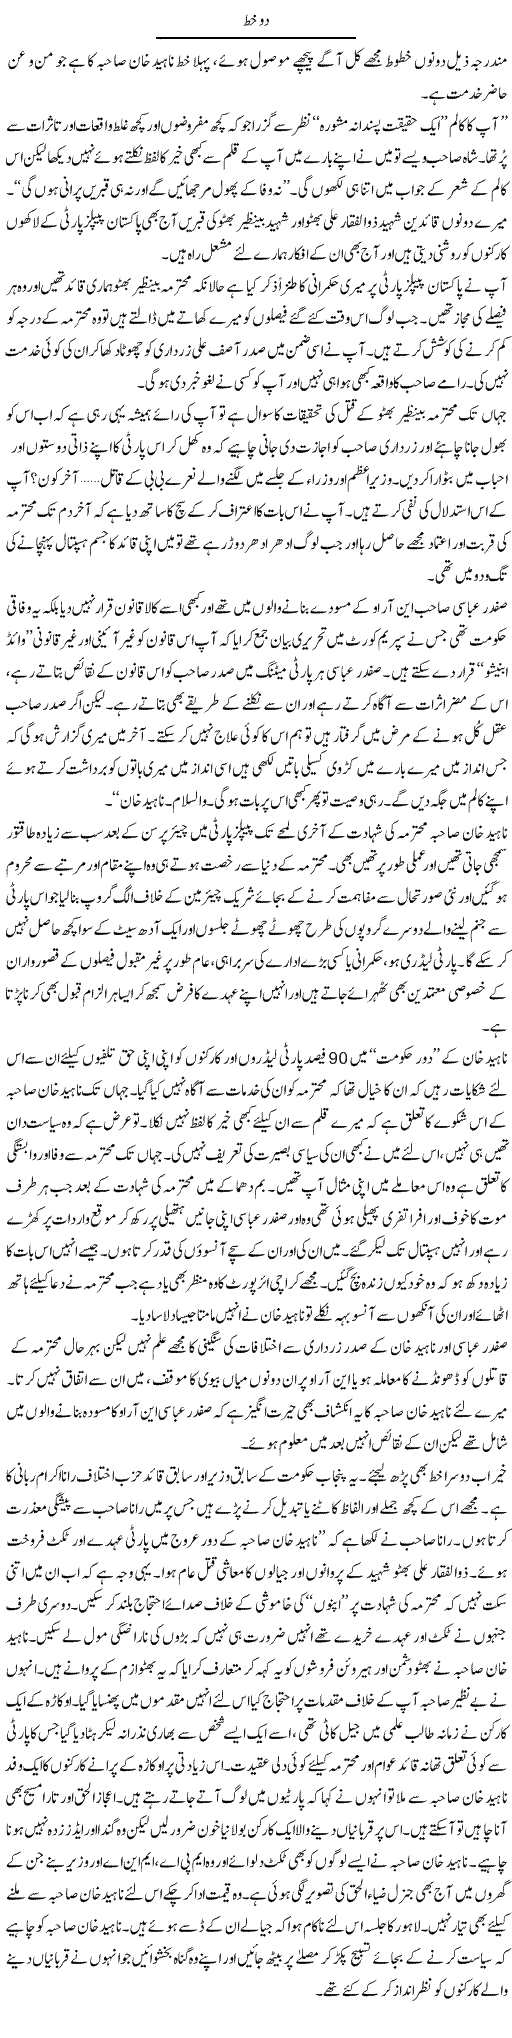 Two Letters Express Column Abbas Athar 7 December 2010